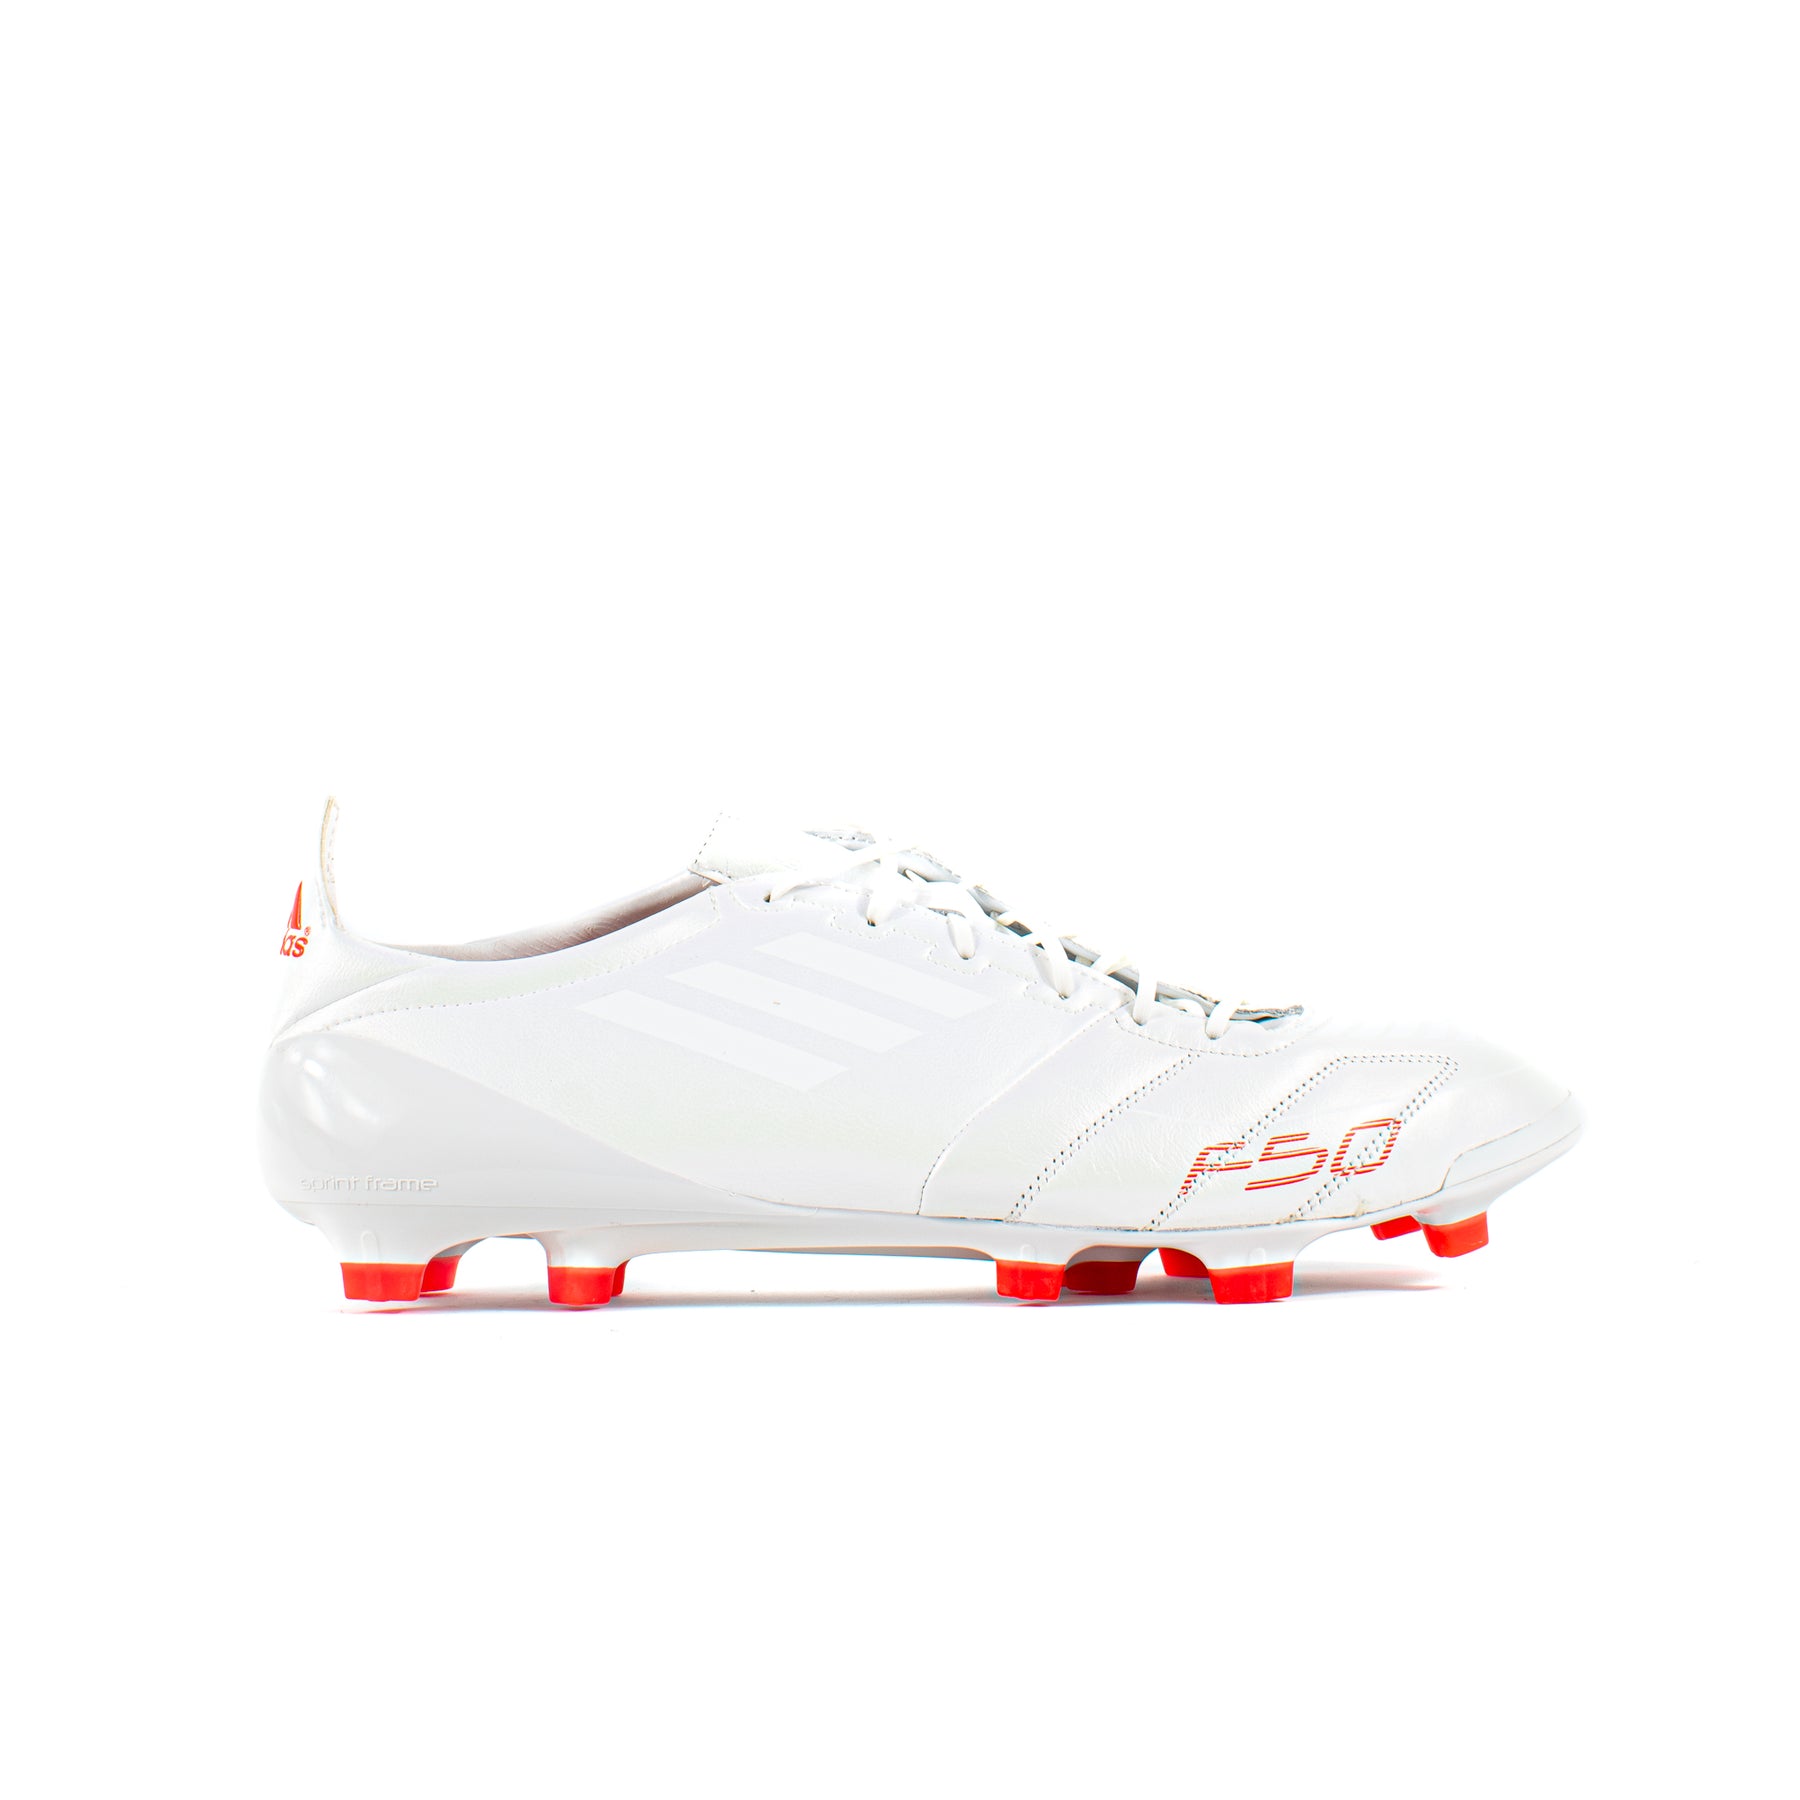 dal selvbiografi røre ved Adidas F50 Adizero Leather Whiteout FG – Classic Soccer Cleats